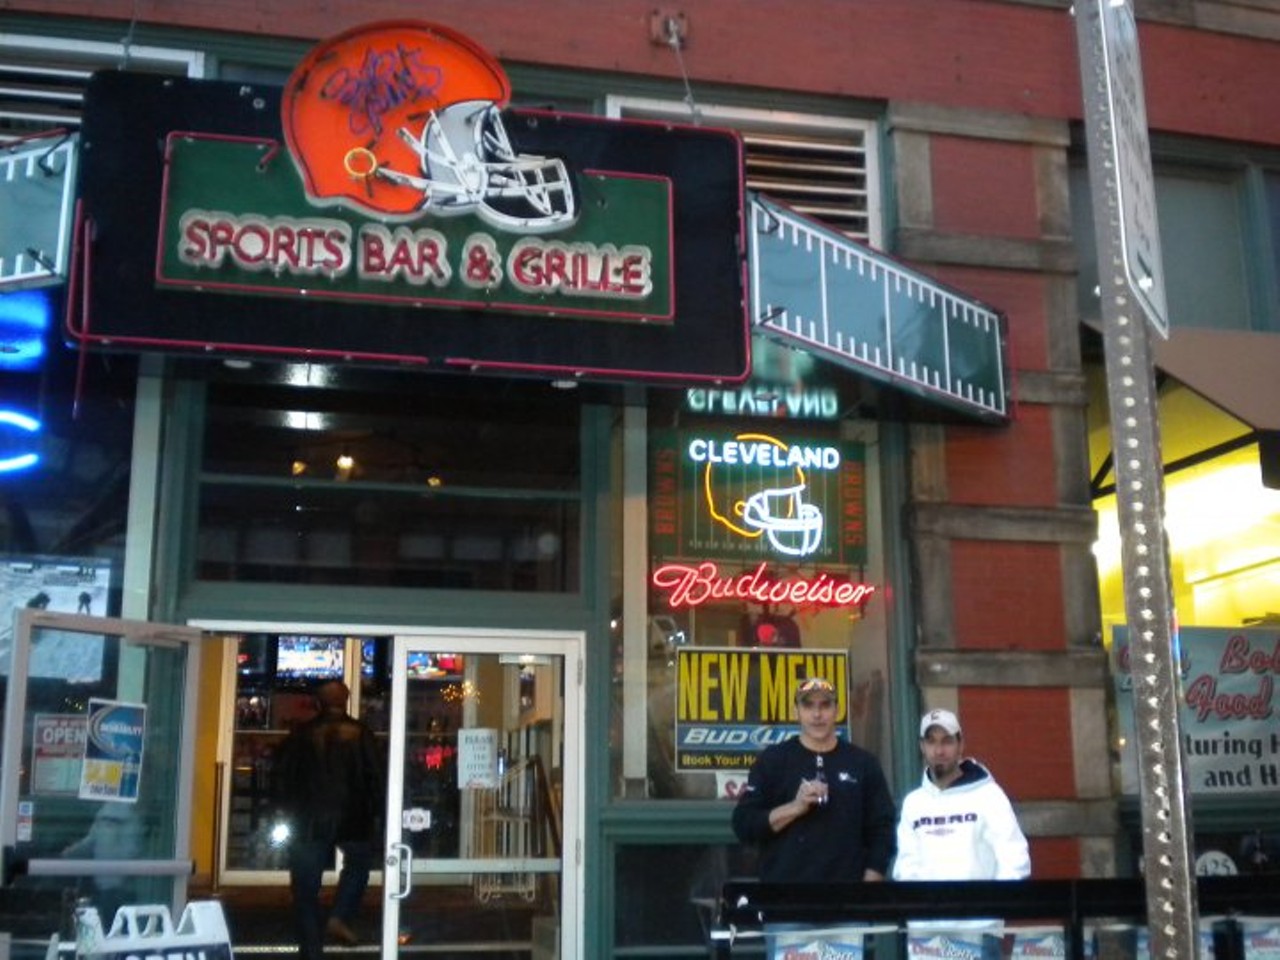 How about watching a Browns home game with Browns legend Bob Golic? Well on home game days a Golic's Sports bar & Grill on West 6th in downtown Cleveland, you can see Bob Golic treating everyone like family. While you are there, make sure to try the wings! Bob Golic's Sports Bar & Grill is located at 1213 West Sixth St. Call 216-363-1130 or visit bobgolic.com for more information.